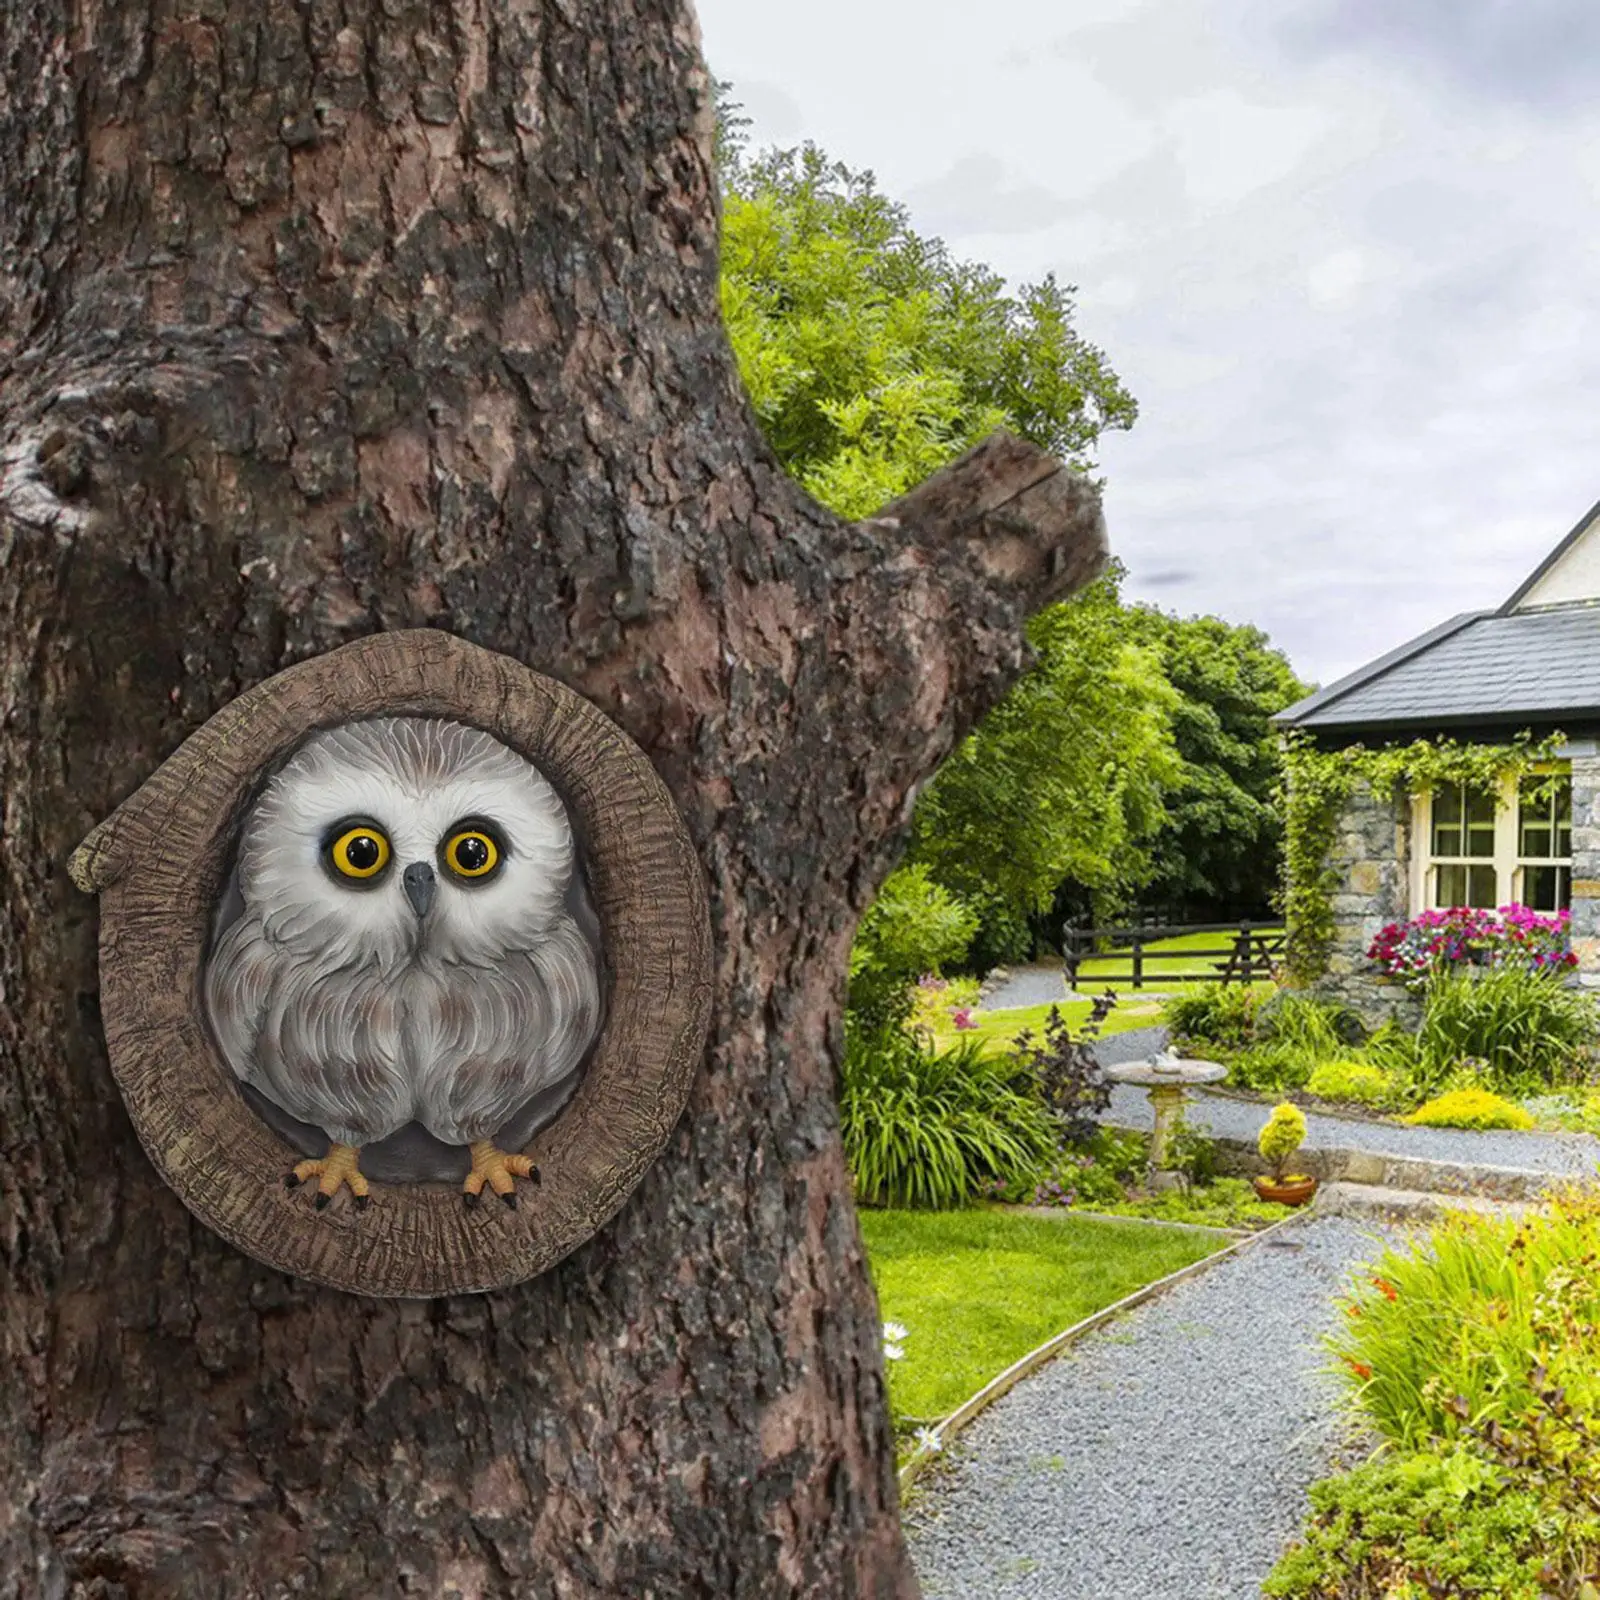 Resin Owl Sculpture Tree Ornament 7x2x7inch Water Resistant for Garden, Trees or Wall Easily Install Multifunctional Cute